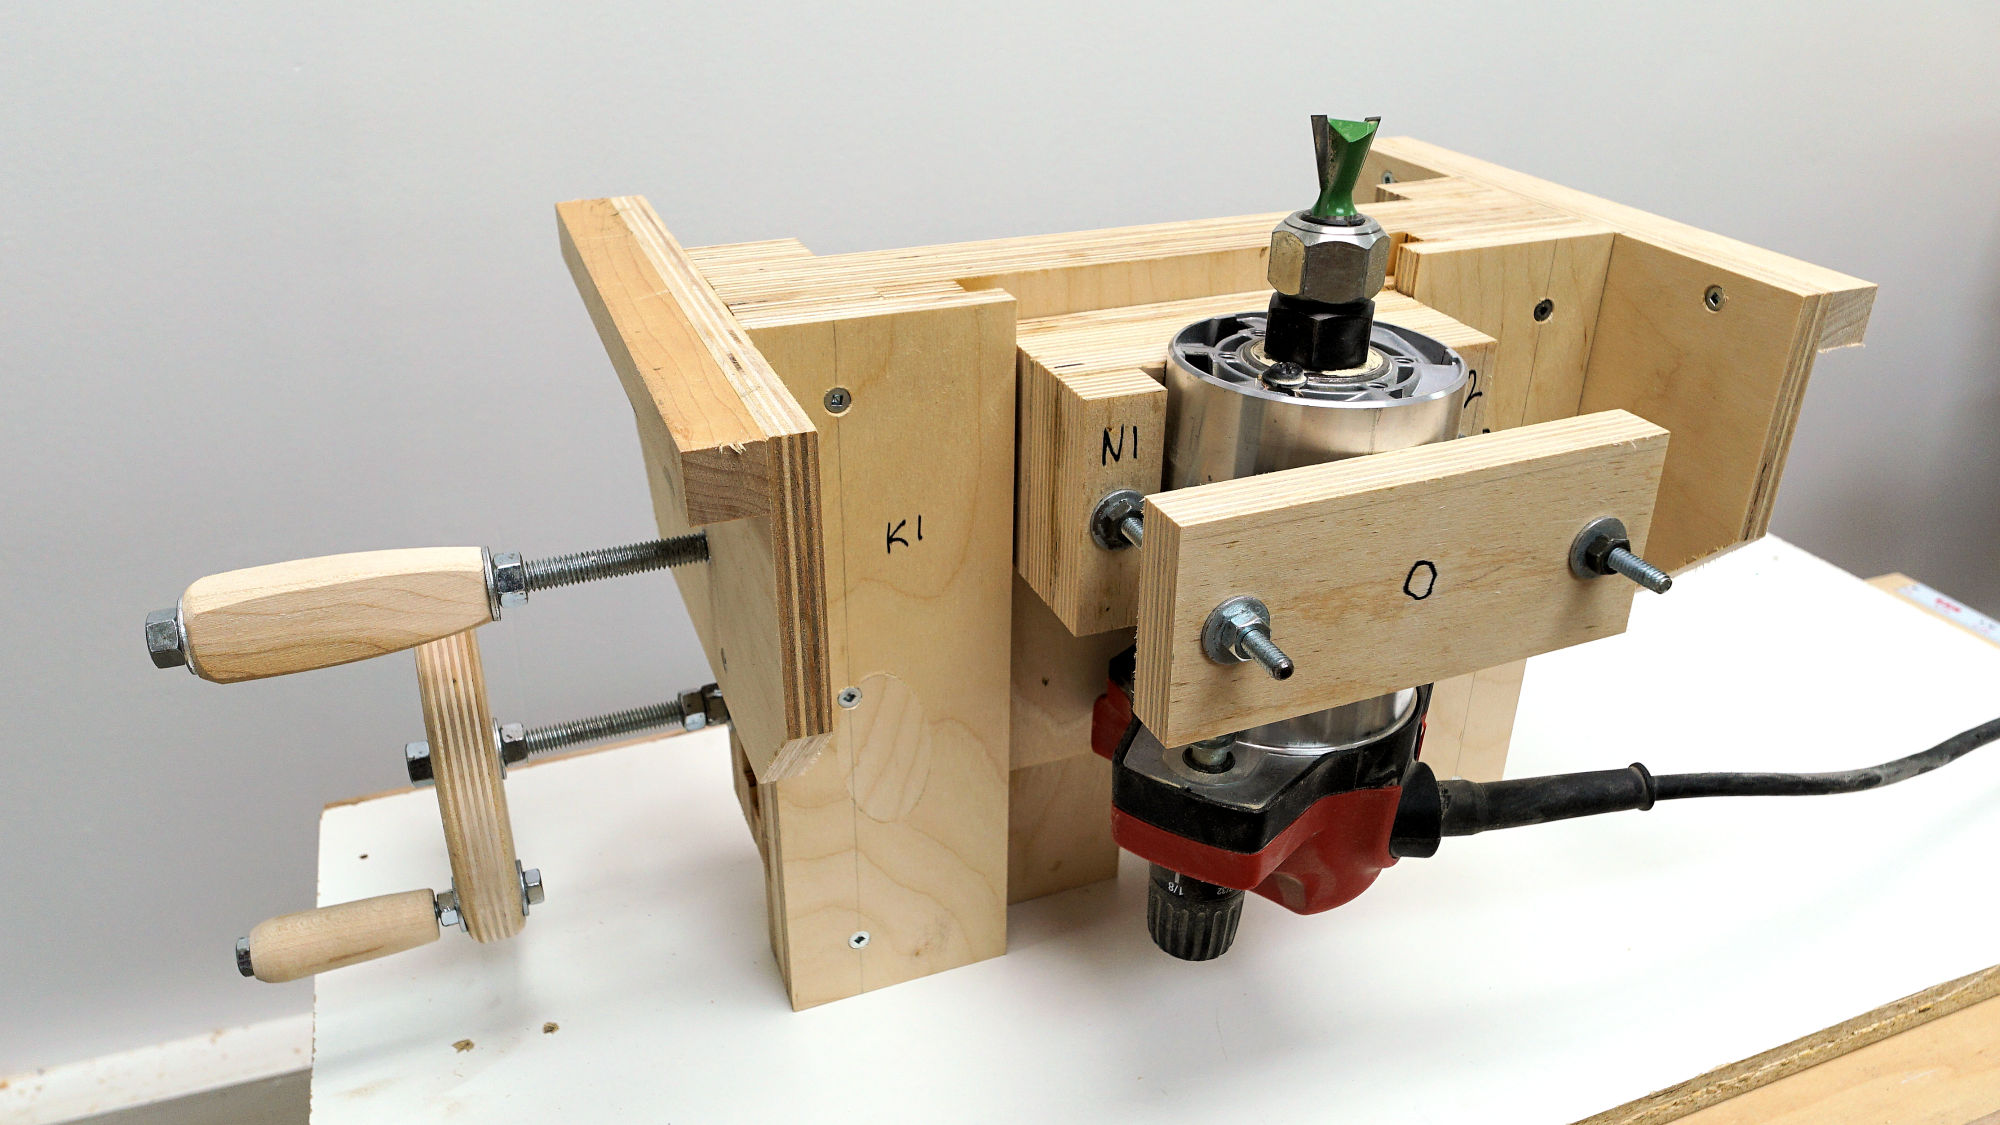 How To Make A Homemade Router Lift - IBUILDIT.CA